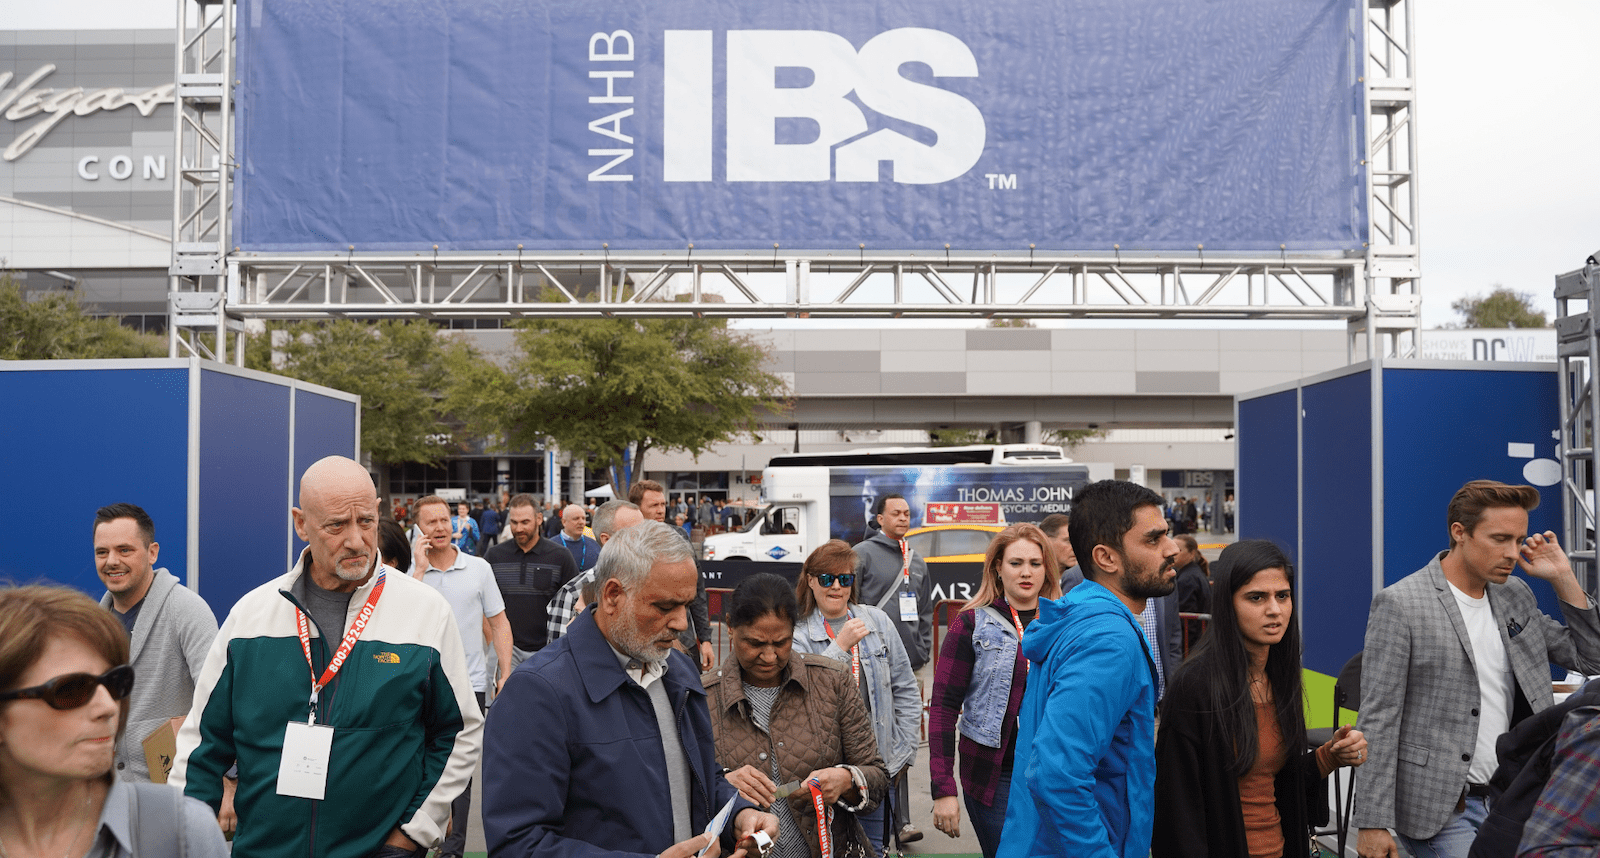 Attendees at the International Builder's Show outside the convention center